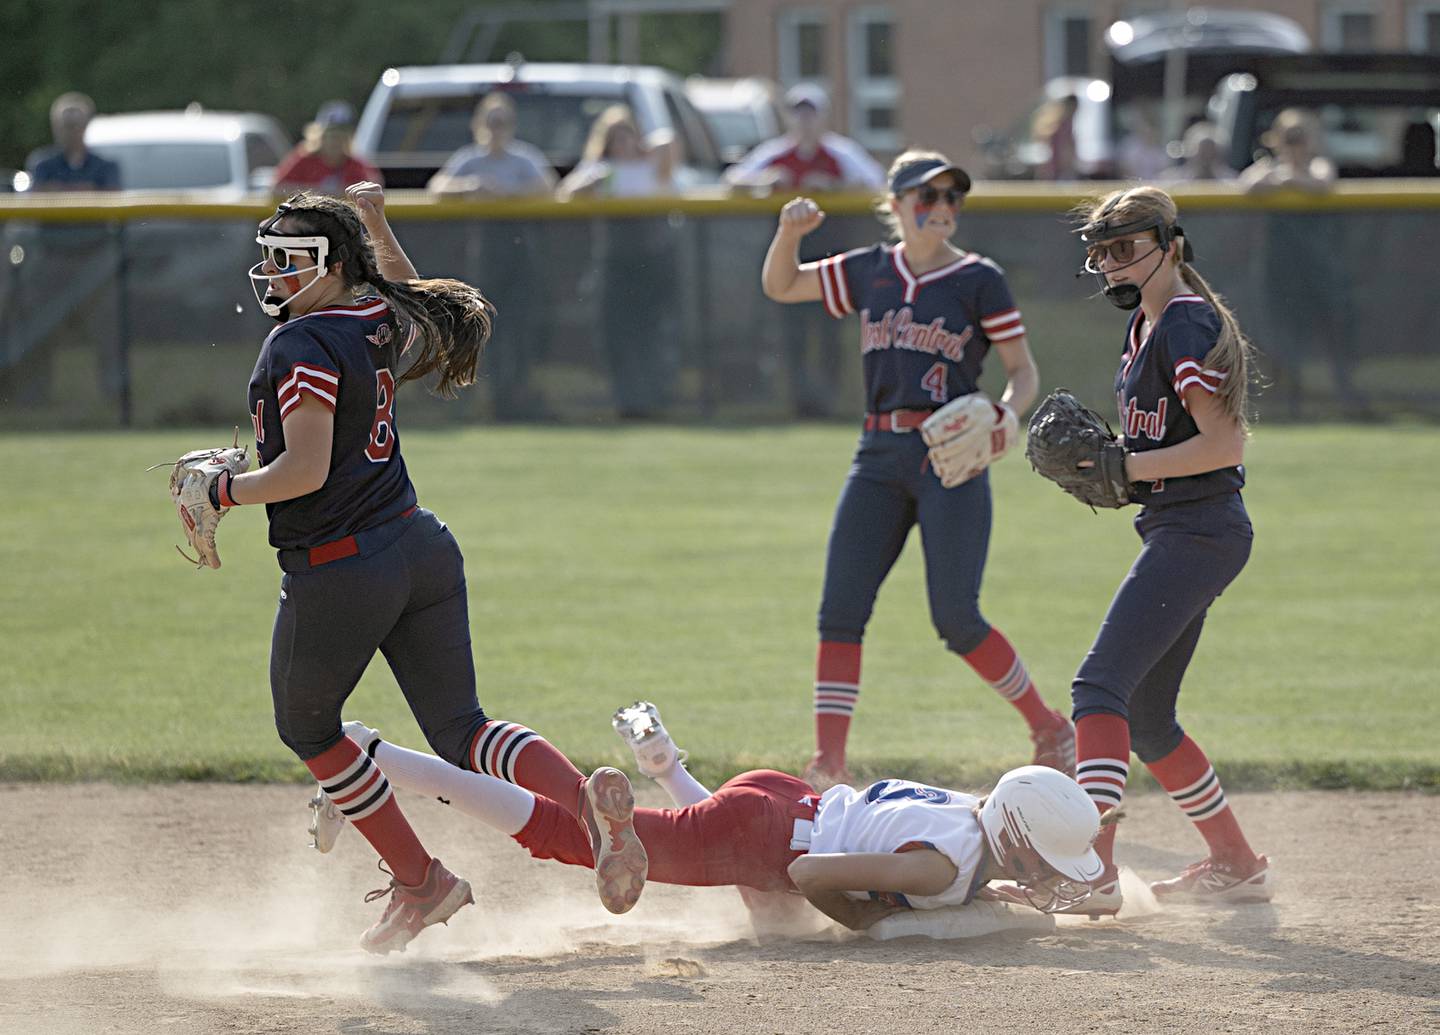 The West Central defense celebrates a double play against Morrison on Wednesday, May 24, 2023 during their Class 1A sectional semifinal at St. Bede Academy.